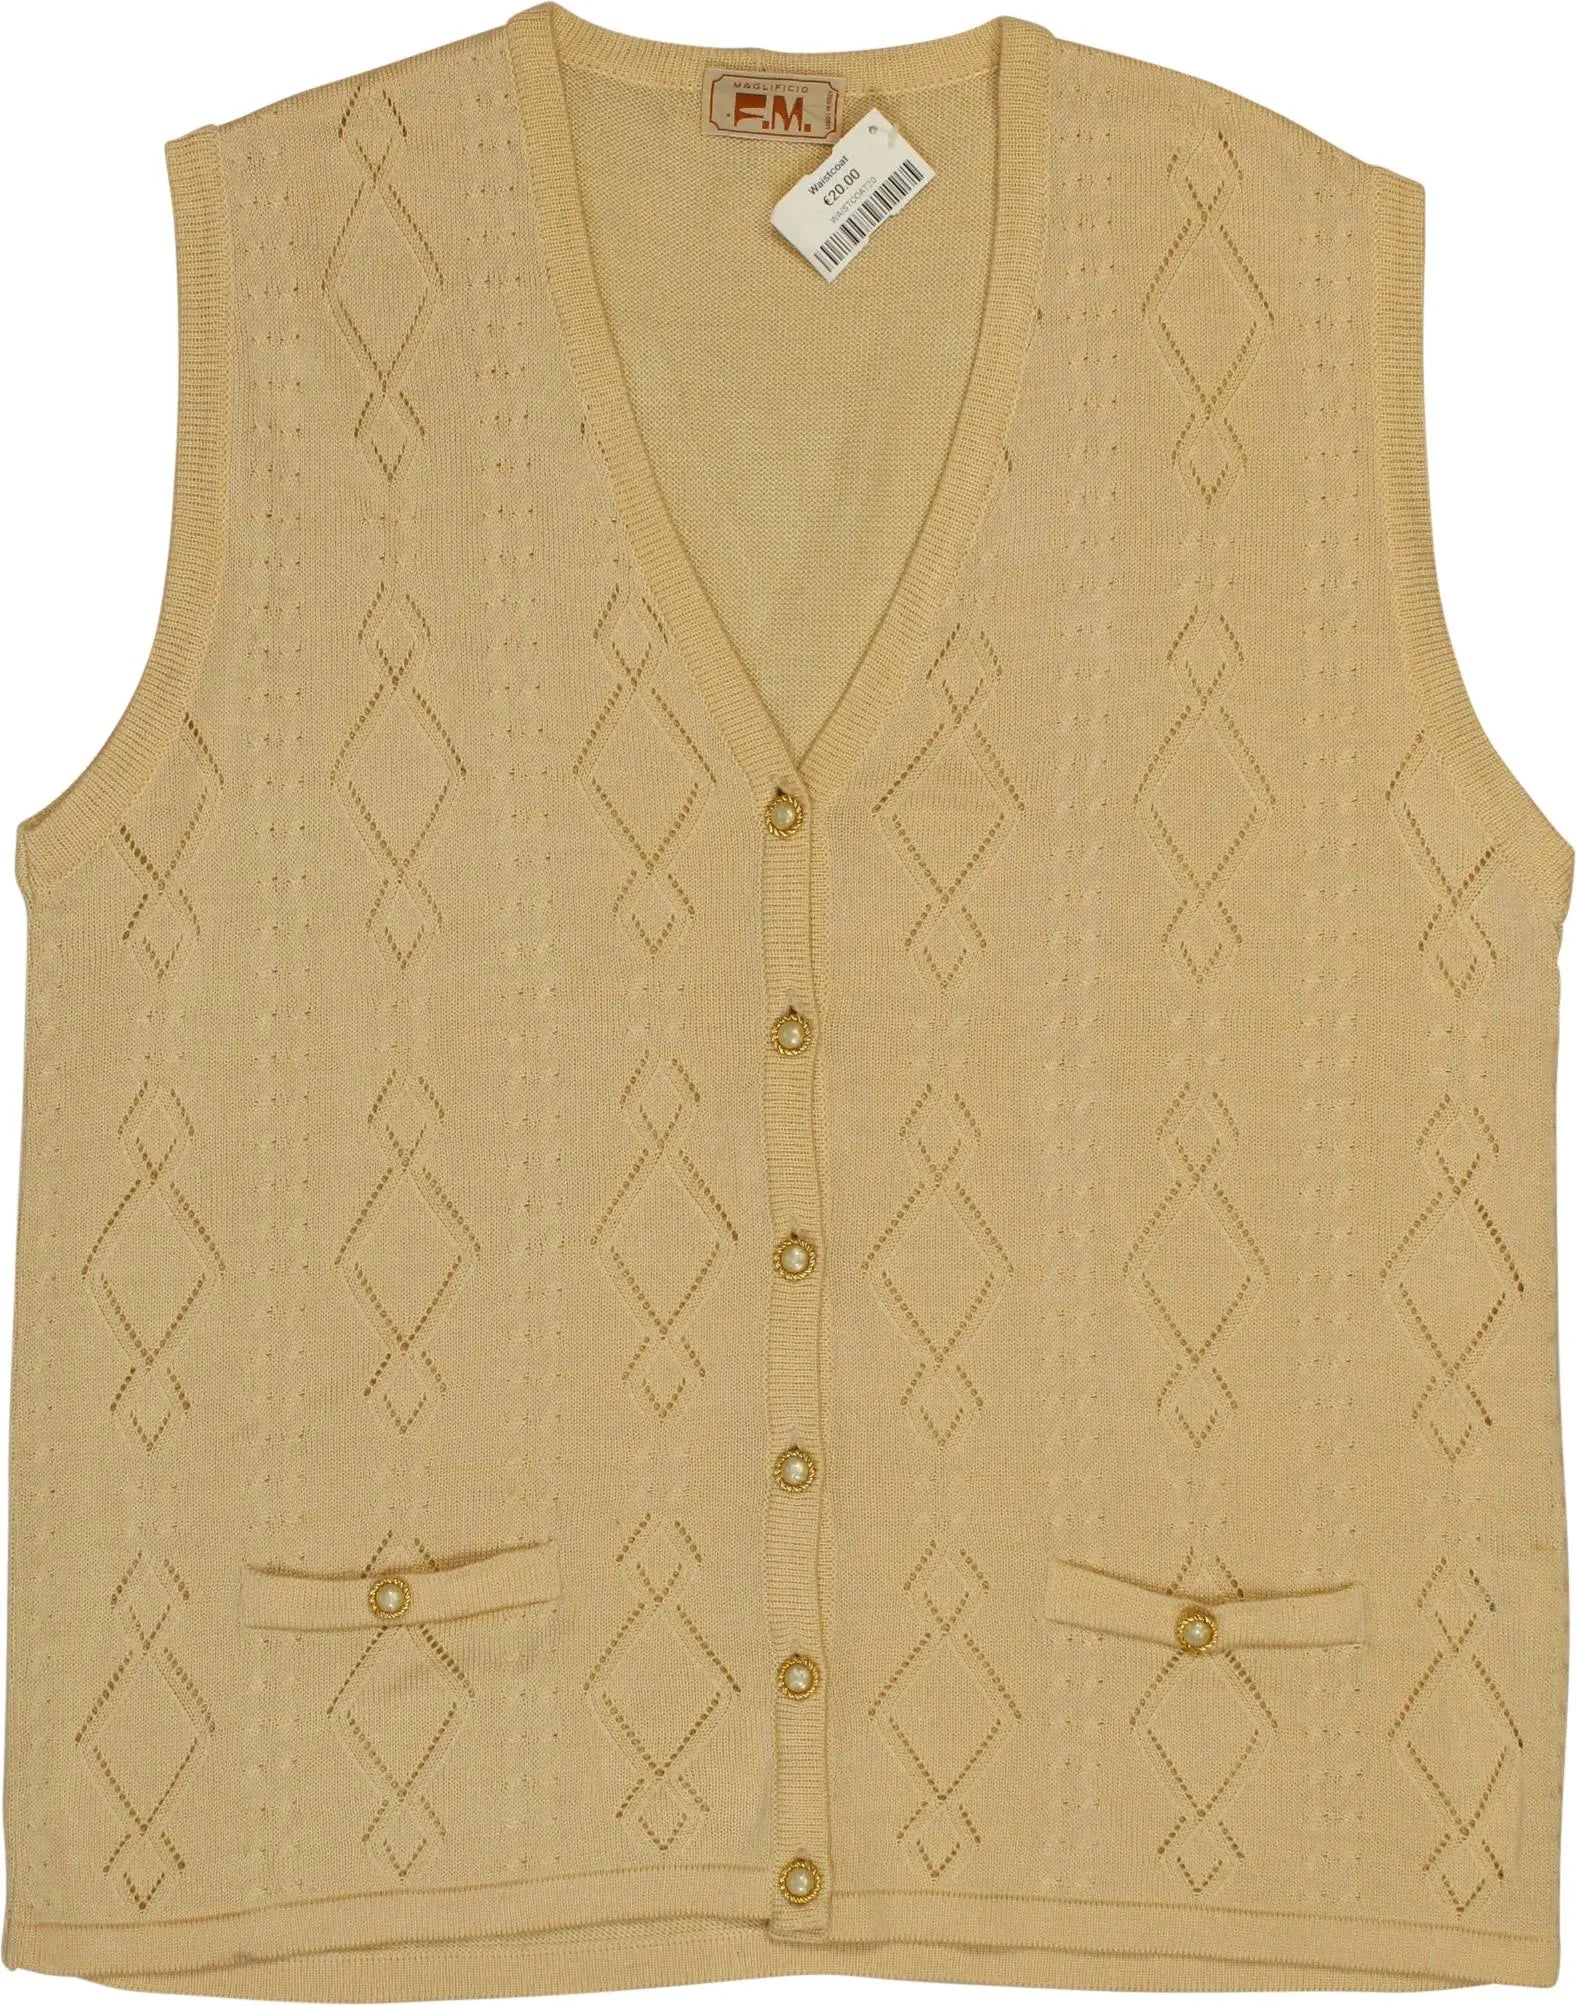 Maglificio - Waistcoat- ThriftTale.com - Vintage and second handclothing